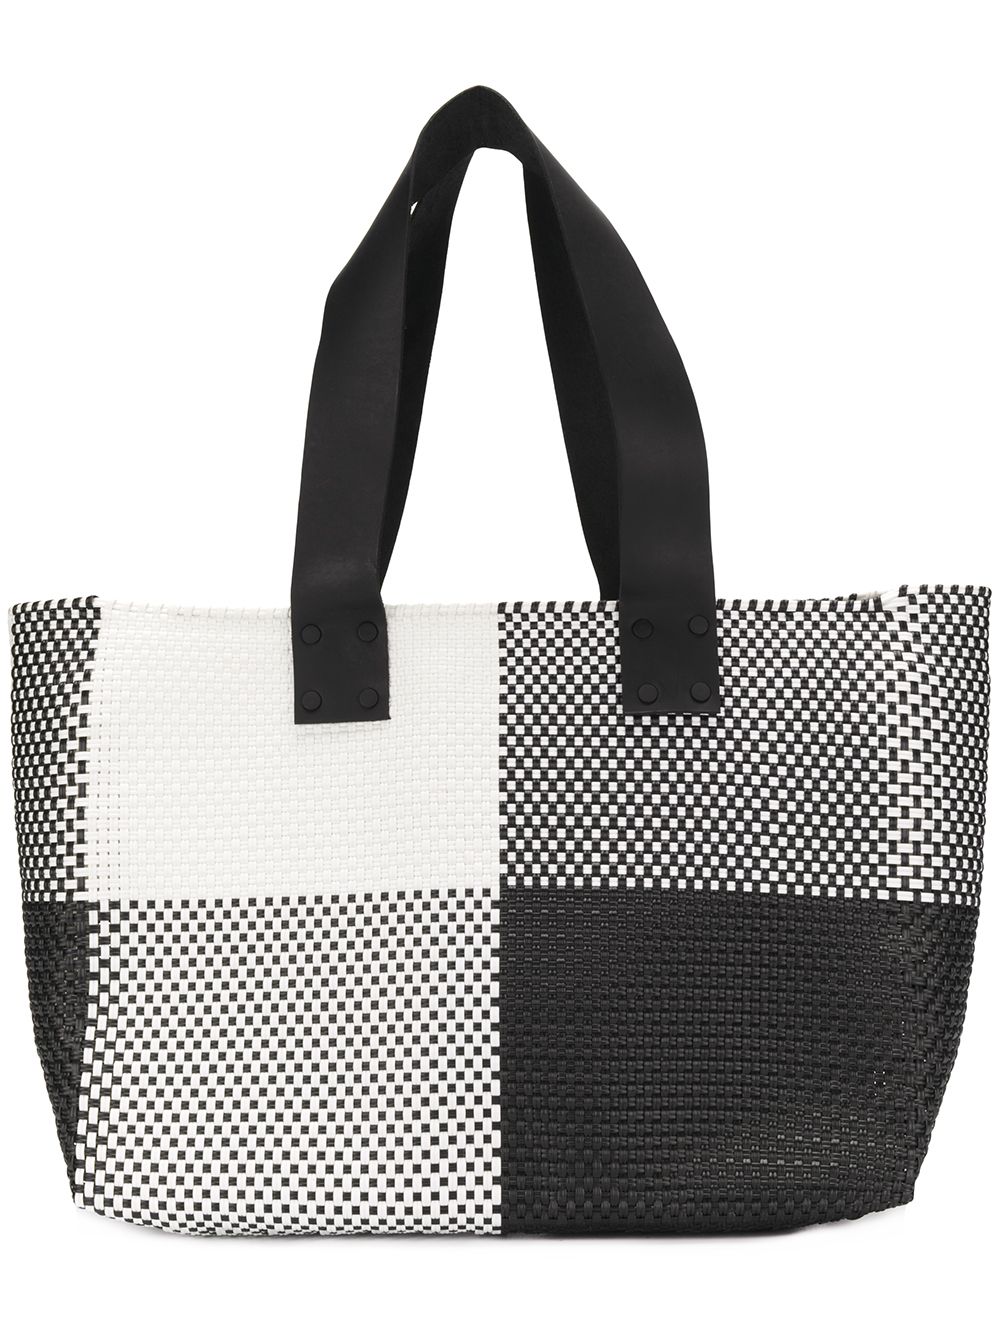 TRUSS NYC TRUSS NYC CHECK TOP-HANDLE TOTE - BLACK,1543LARGETOTE12965571